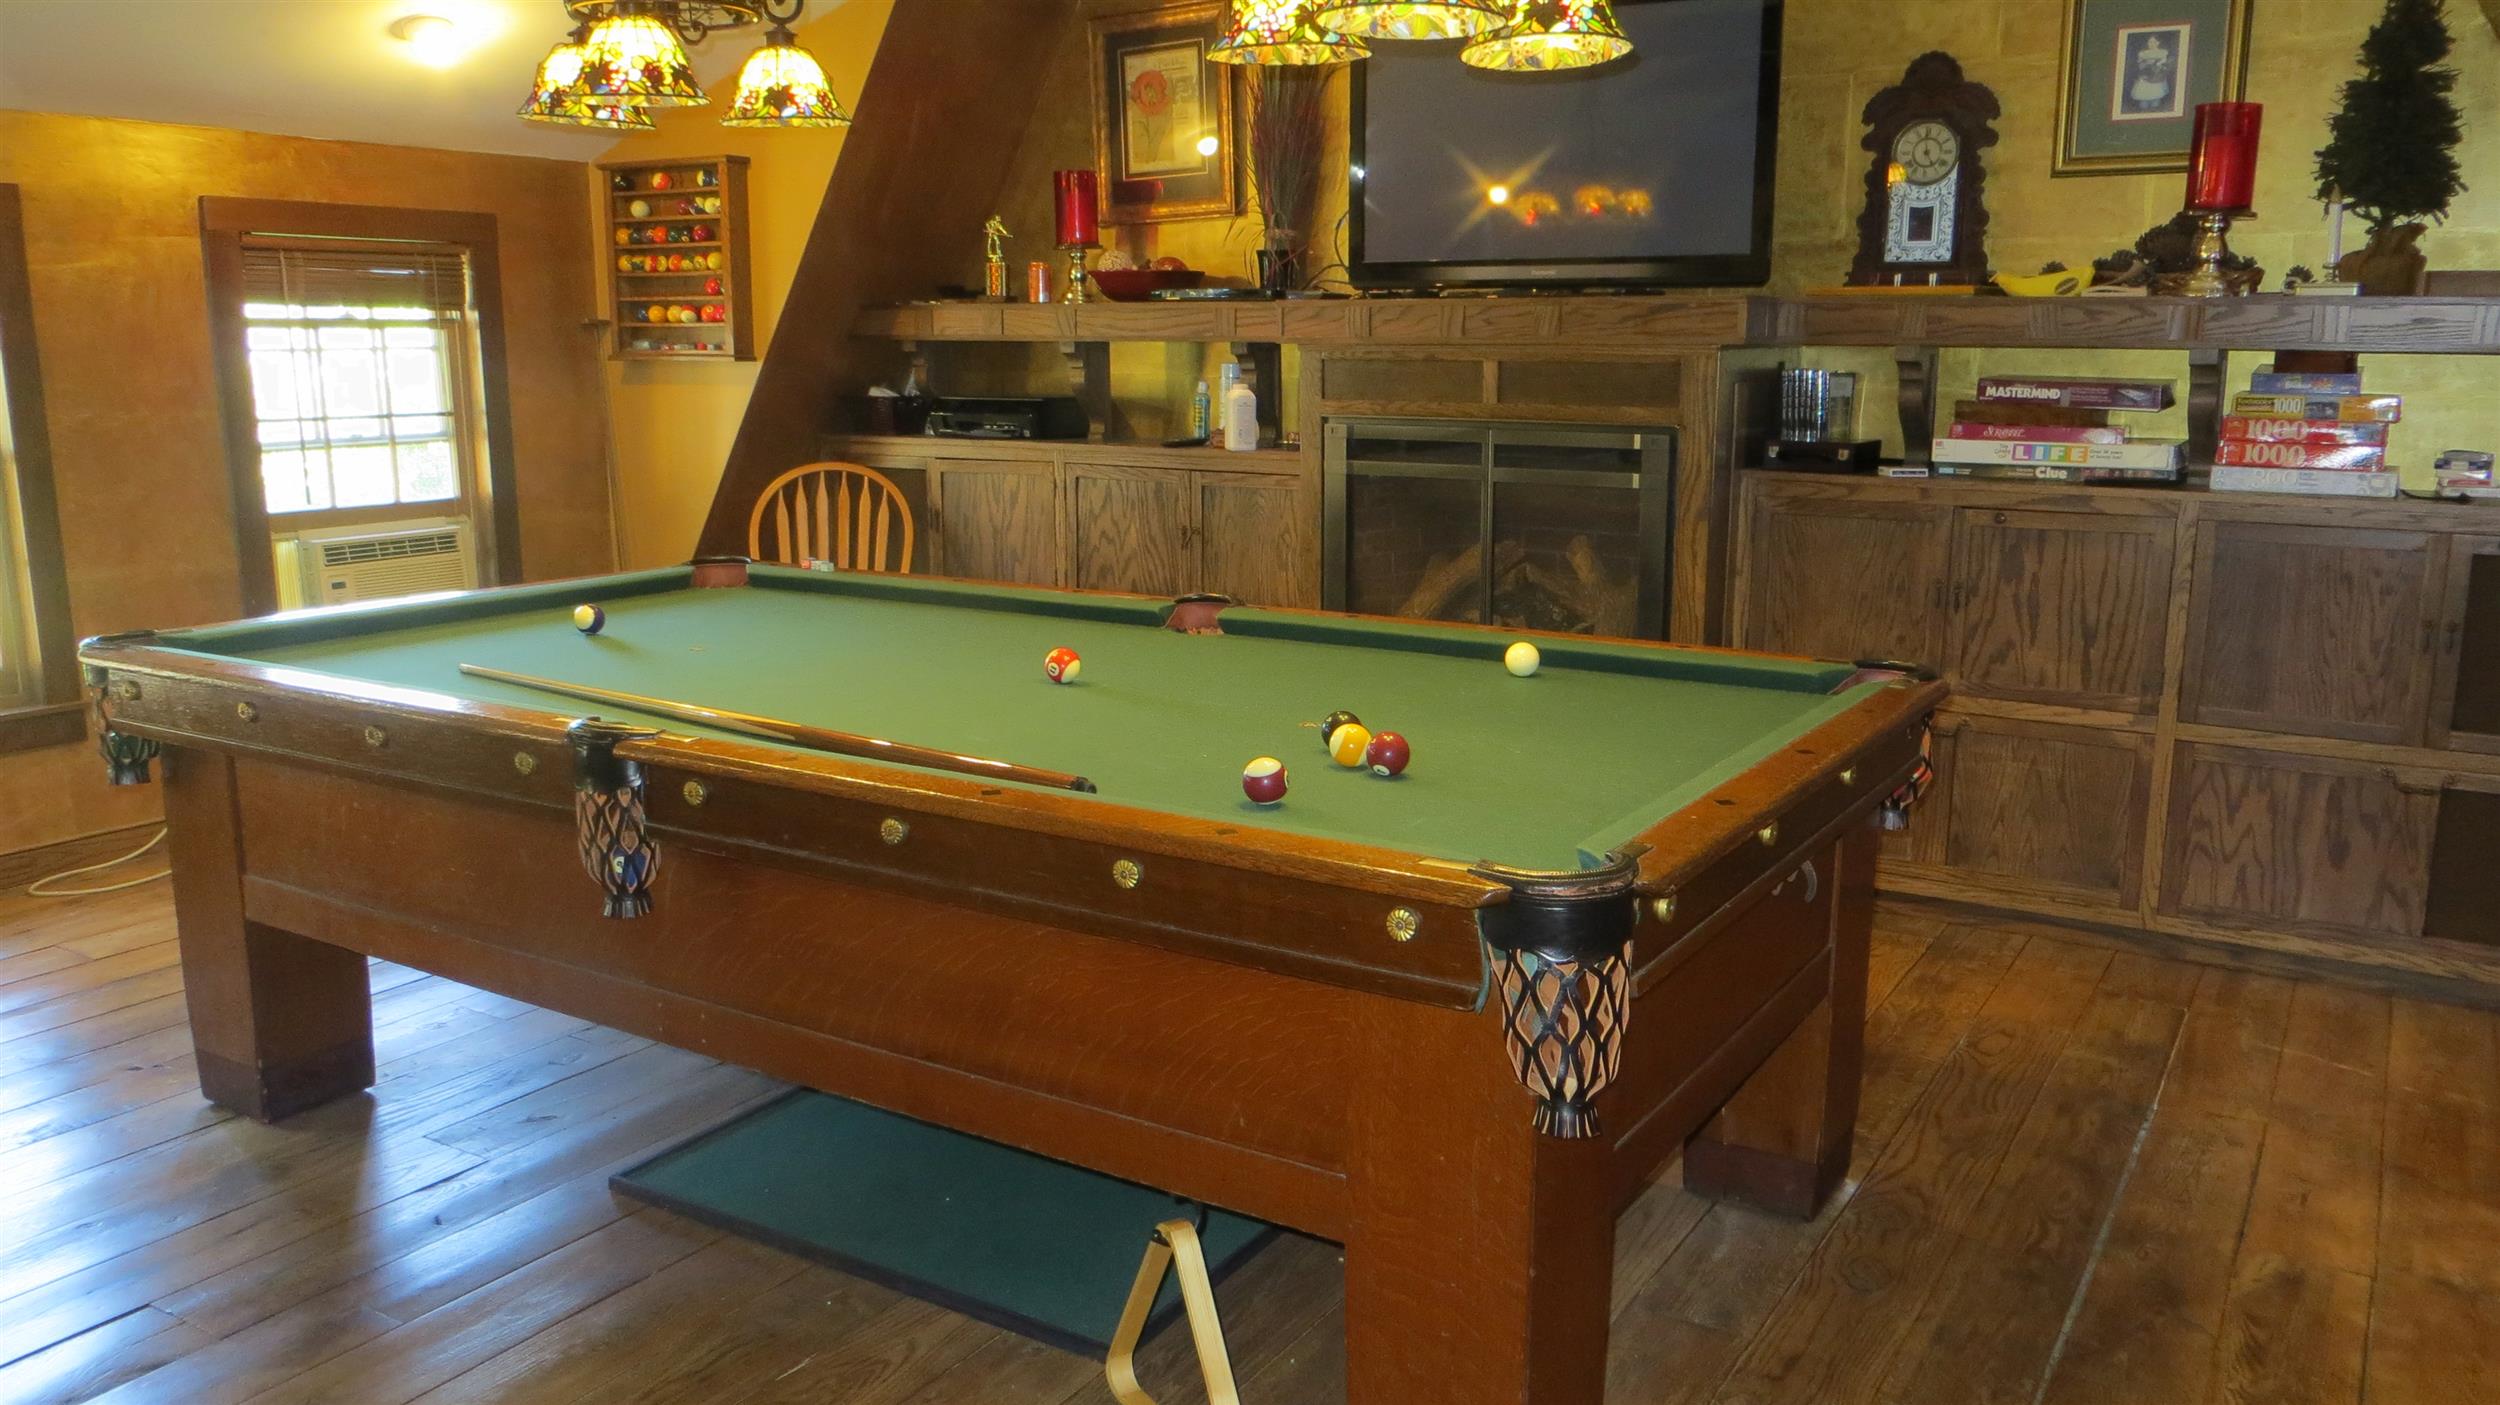 game-room-with-pool-table-and-fireplace.jpg